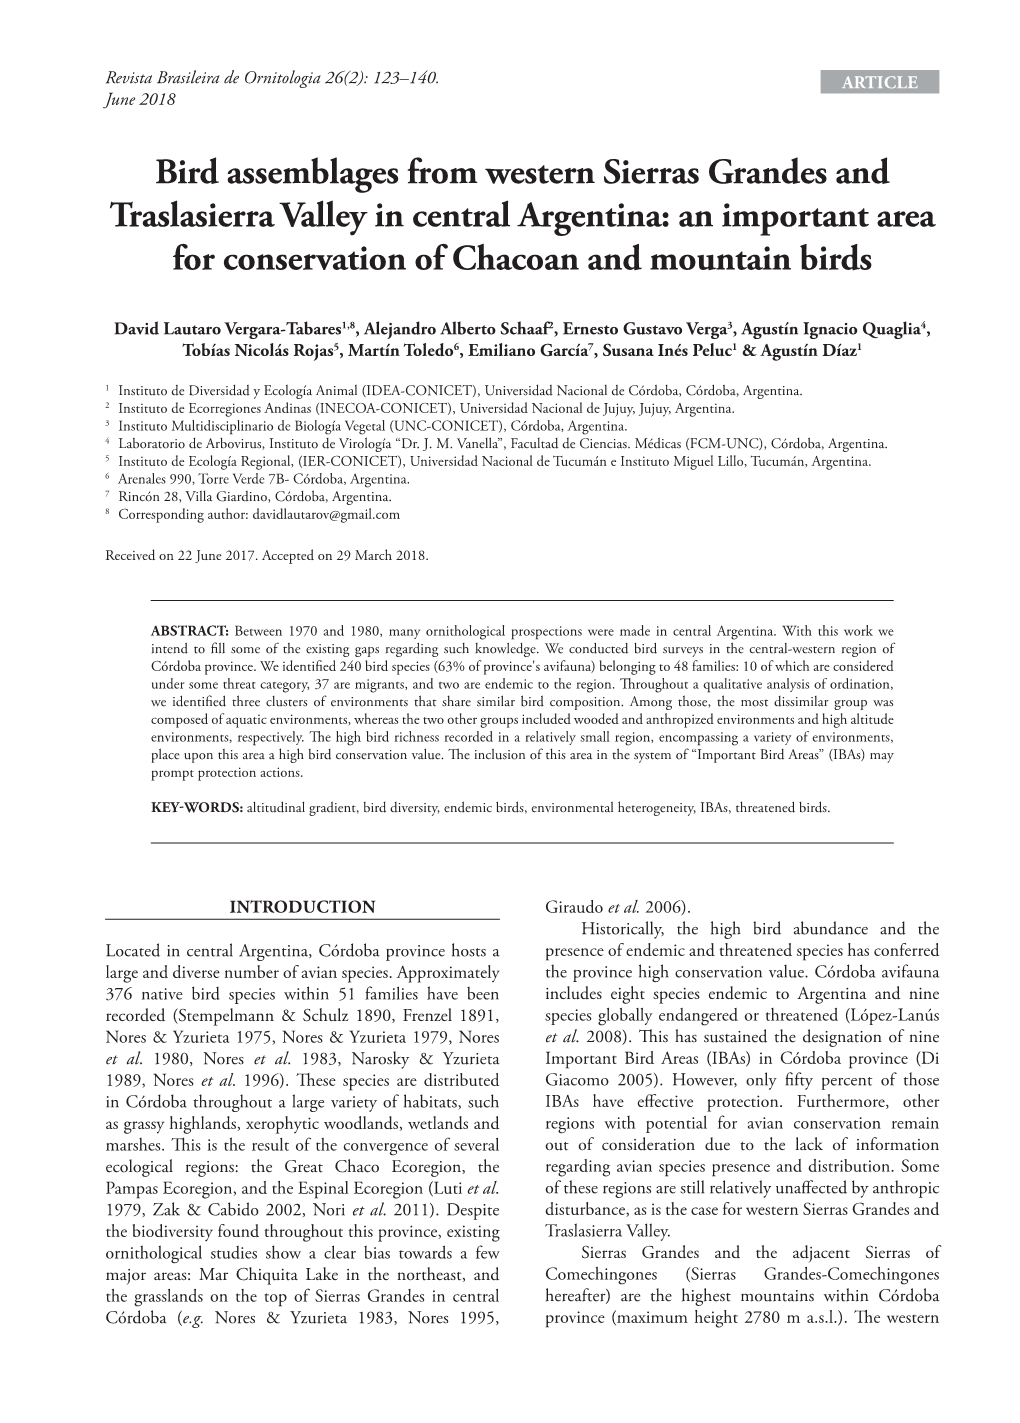 Bird Assemblages from Western Sierras Grandes and Traslasierra Valley in Central Argentina: an Important Area for Conservation of Chacoan and Mountain Birds